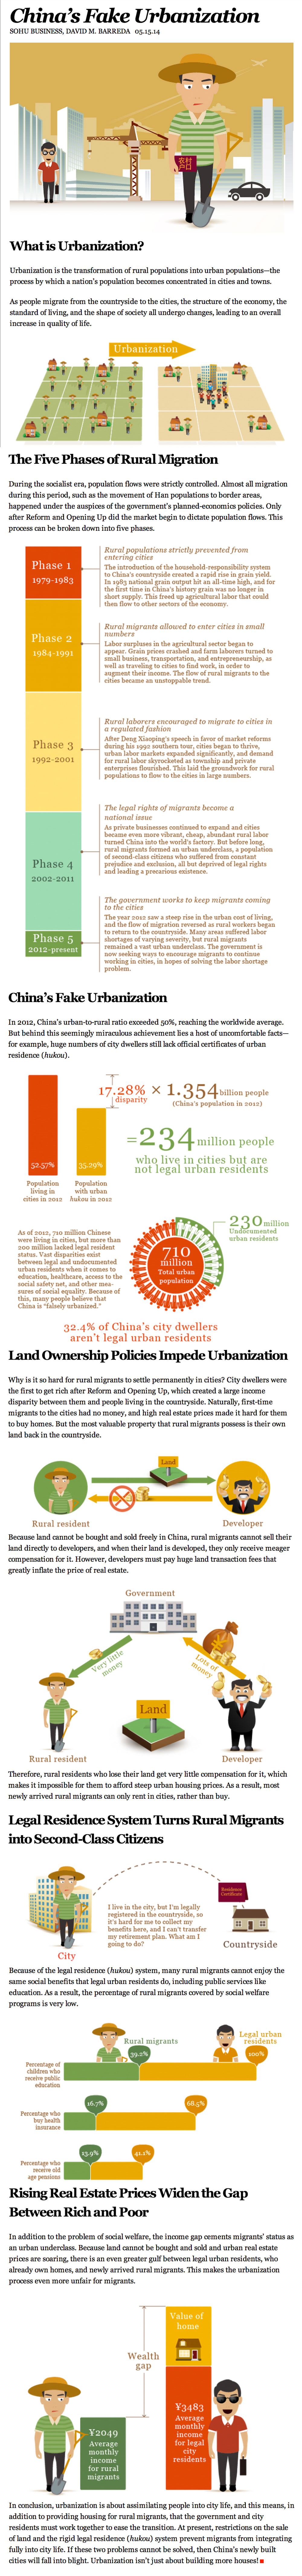 This Infographic About China’s Fake Urbanization 002